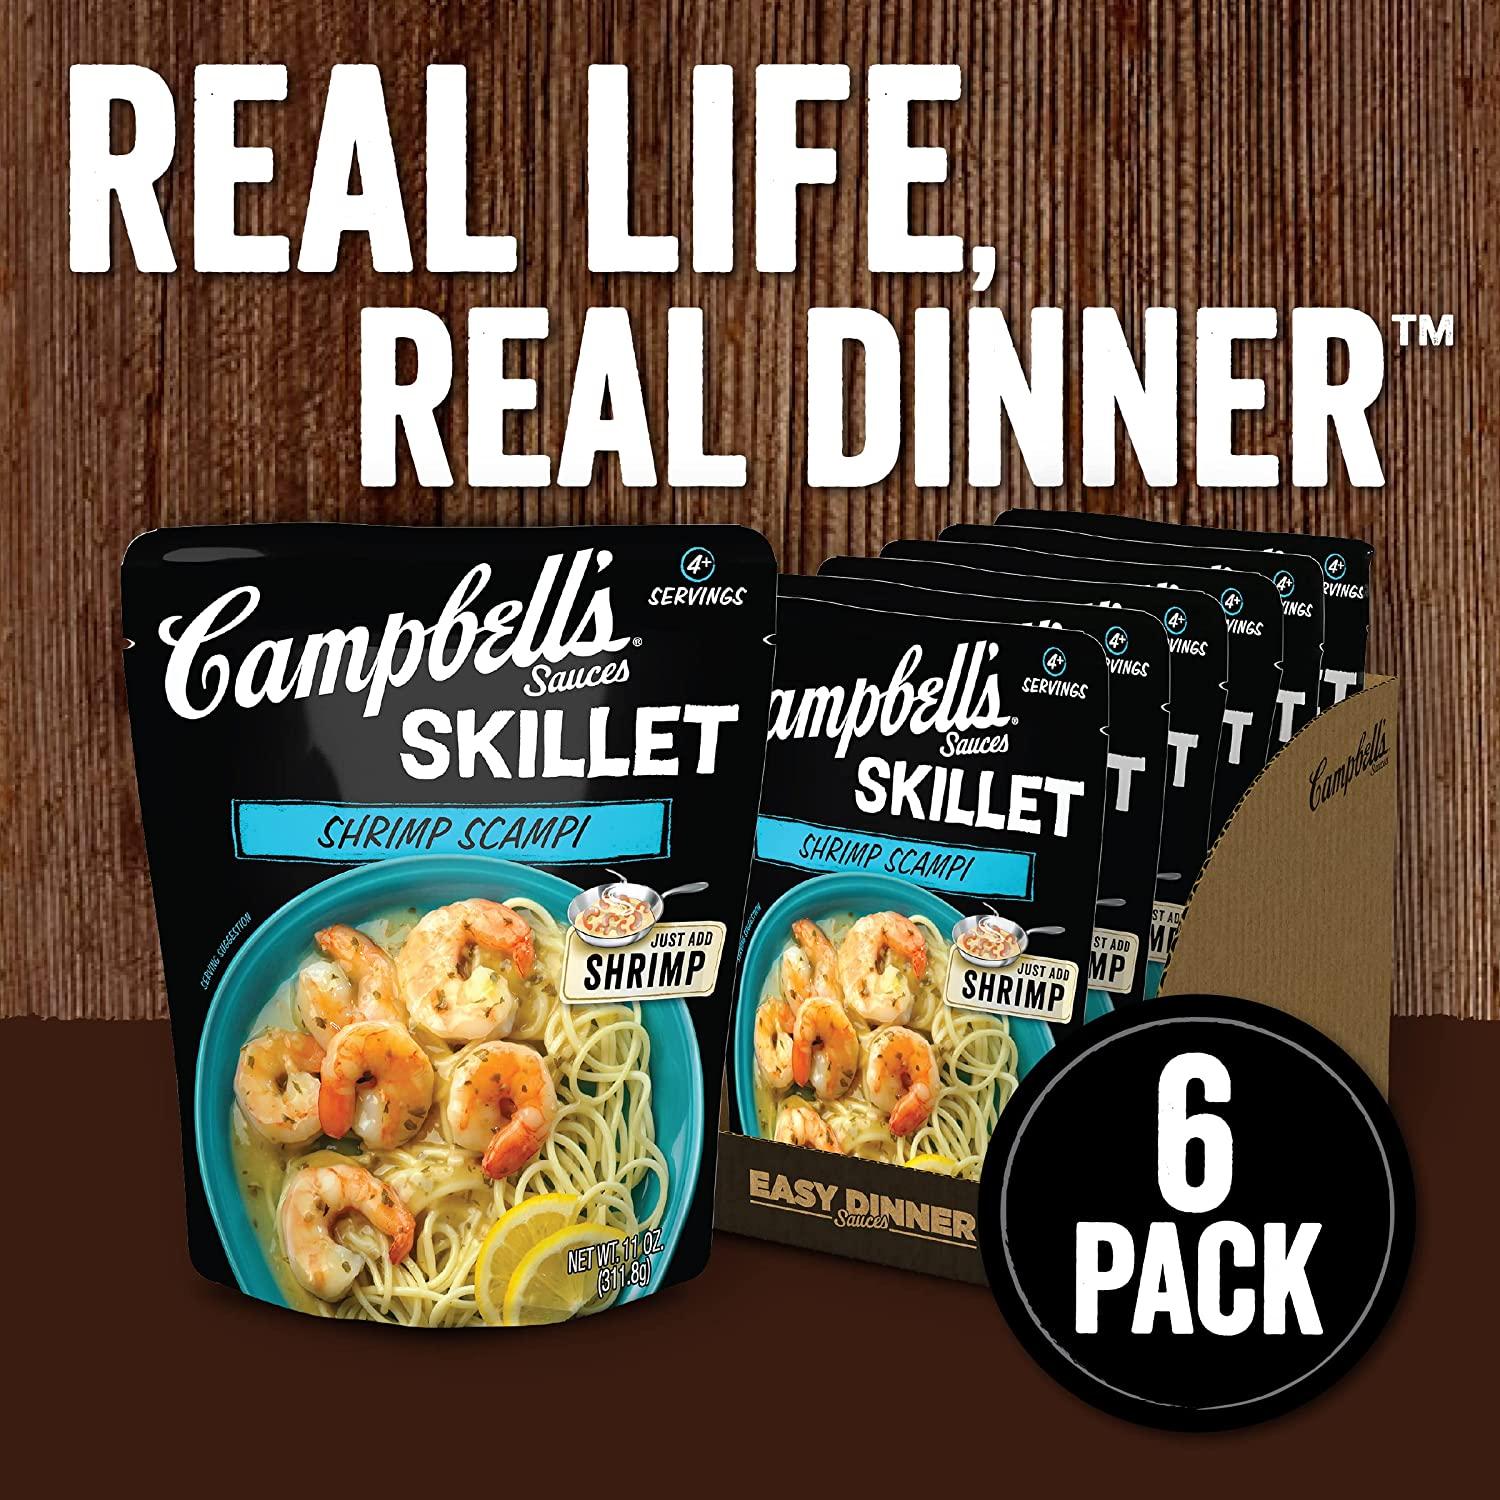 Campbell's Skillet Sauces Review - Quick Chicken Marsala - Smart